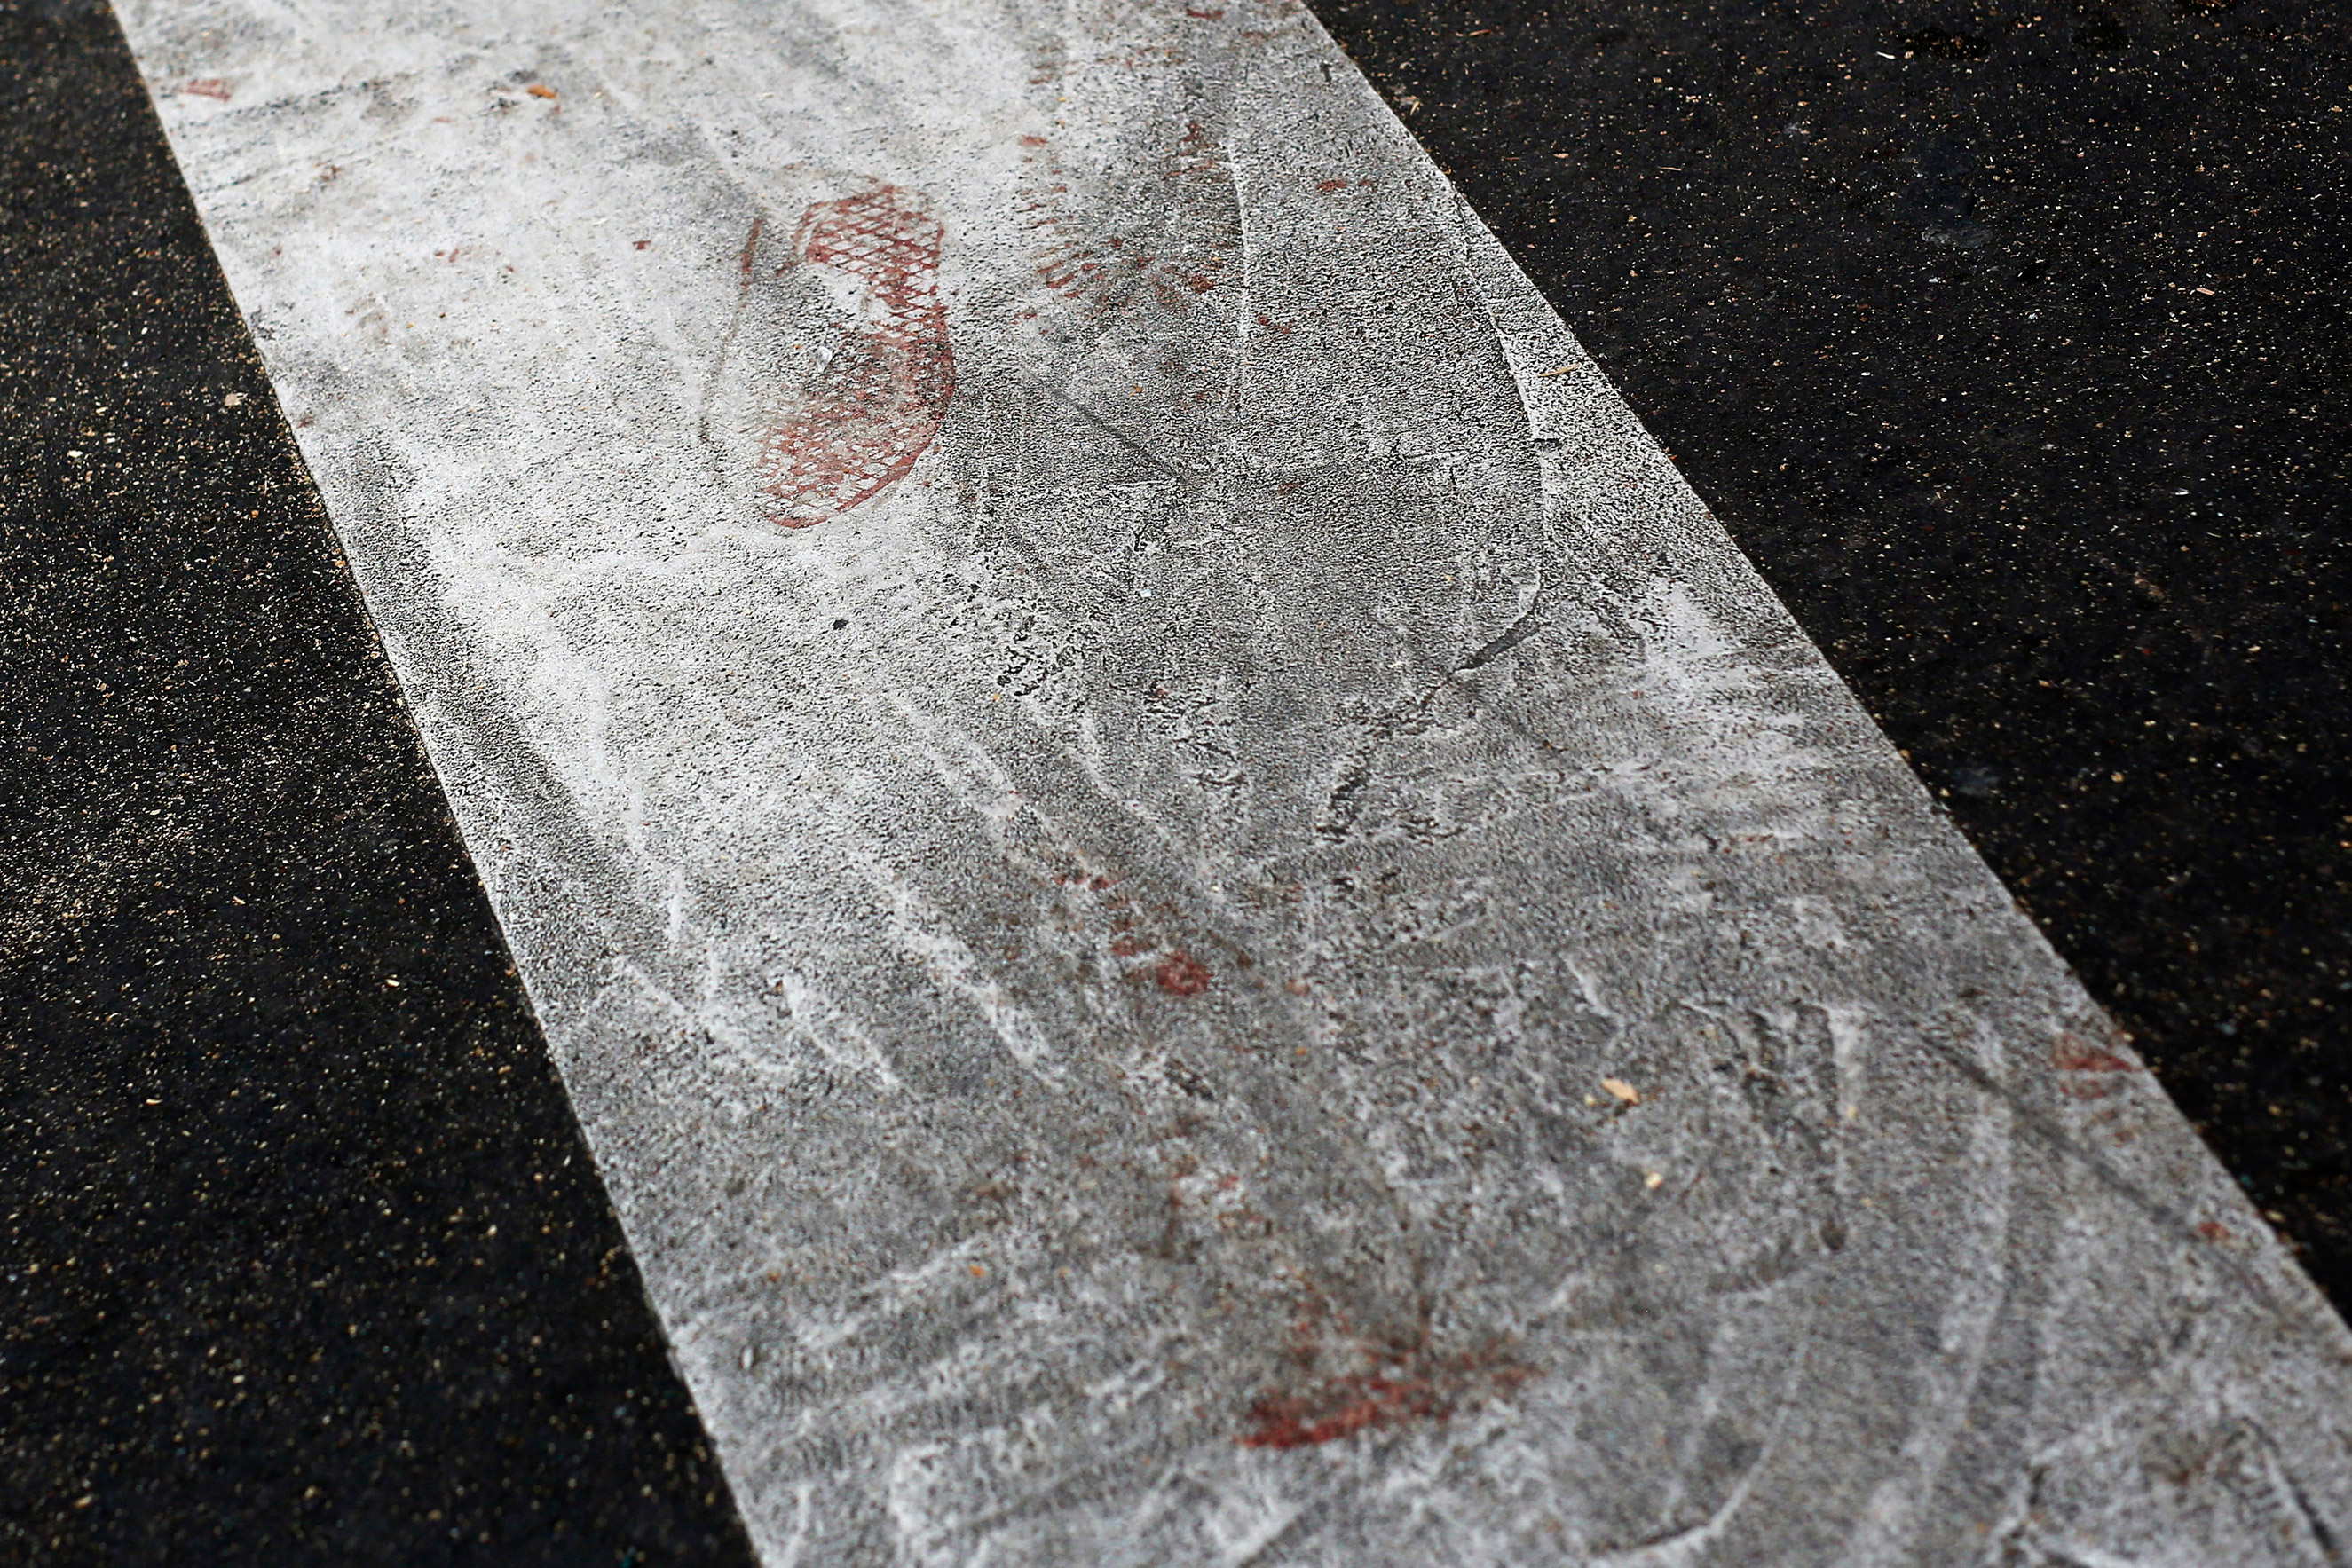 Bloodstained footsteps are visible on the street linking the Carillon cafe and the Petit Cambodge restaurant  in Paris on Nov. 14, 2015.